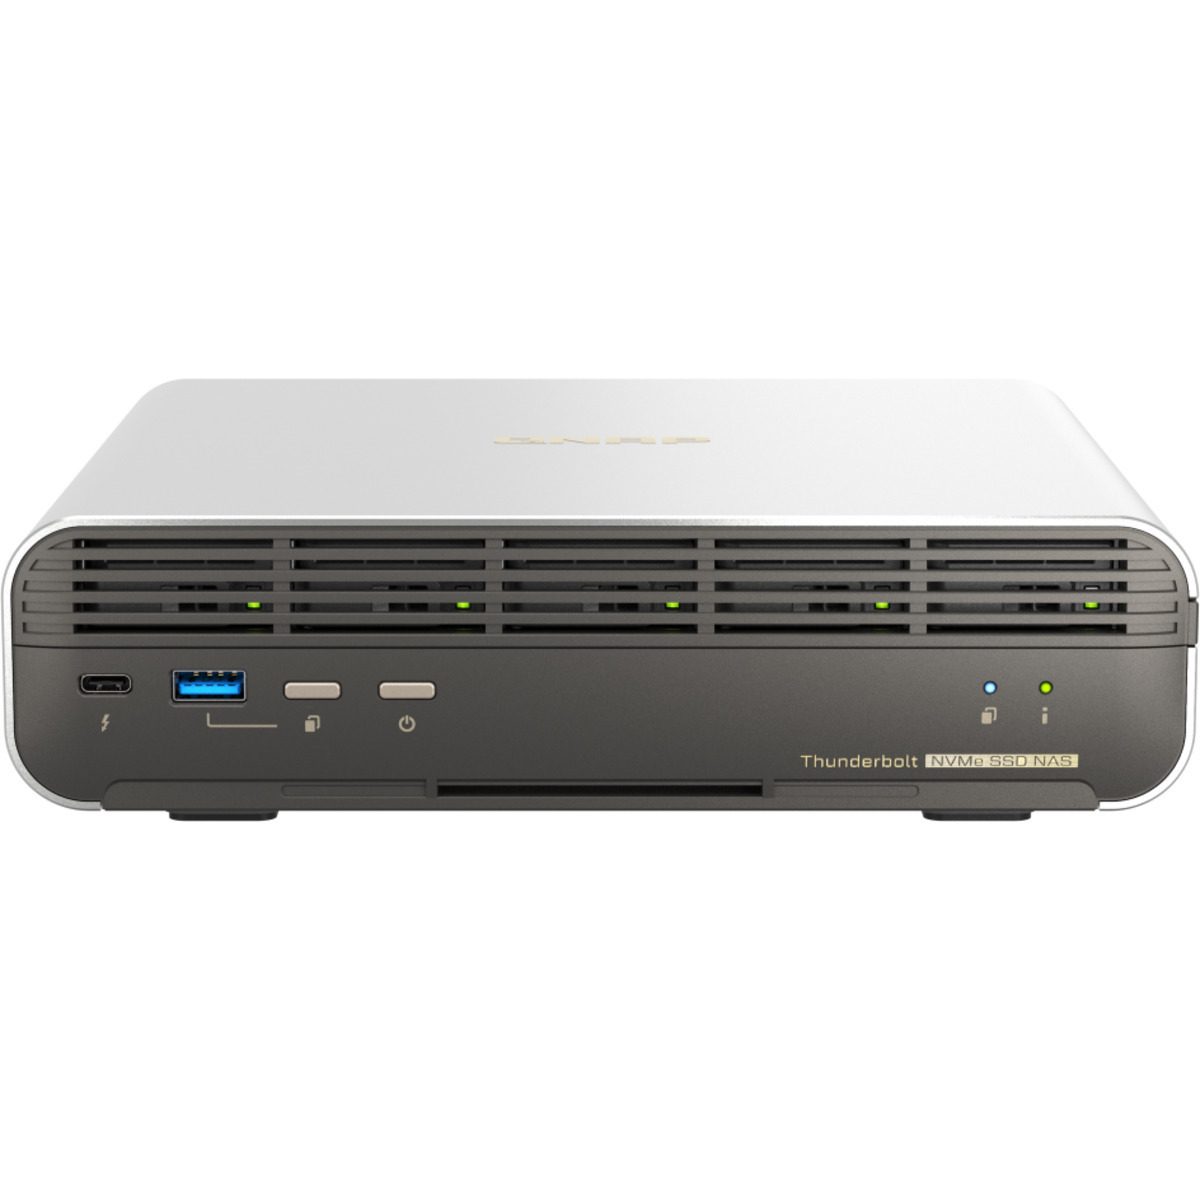 QNAP TBS-h574TX Core i3 Thunderbolt 4 5tb 5-Bay Desktop Multimedia / Power User / Business DAS-NAS - Combo Direct + Network Storage Device 5x1tb Sandisk Plus Series SDSSDA3N-1T00  3200/2500MB/s M.2 2280 NVMe SSD CONSUMER Class Drives Installed - Burn-In Tested TBS-h574TX Core i3 Thunderbolt 4